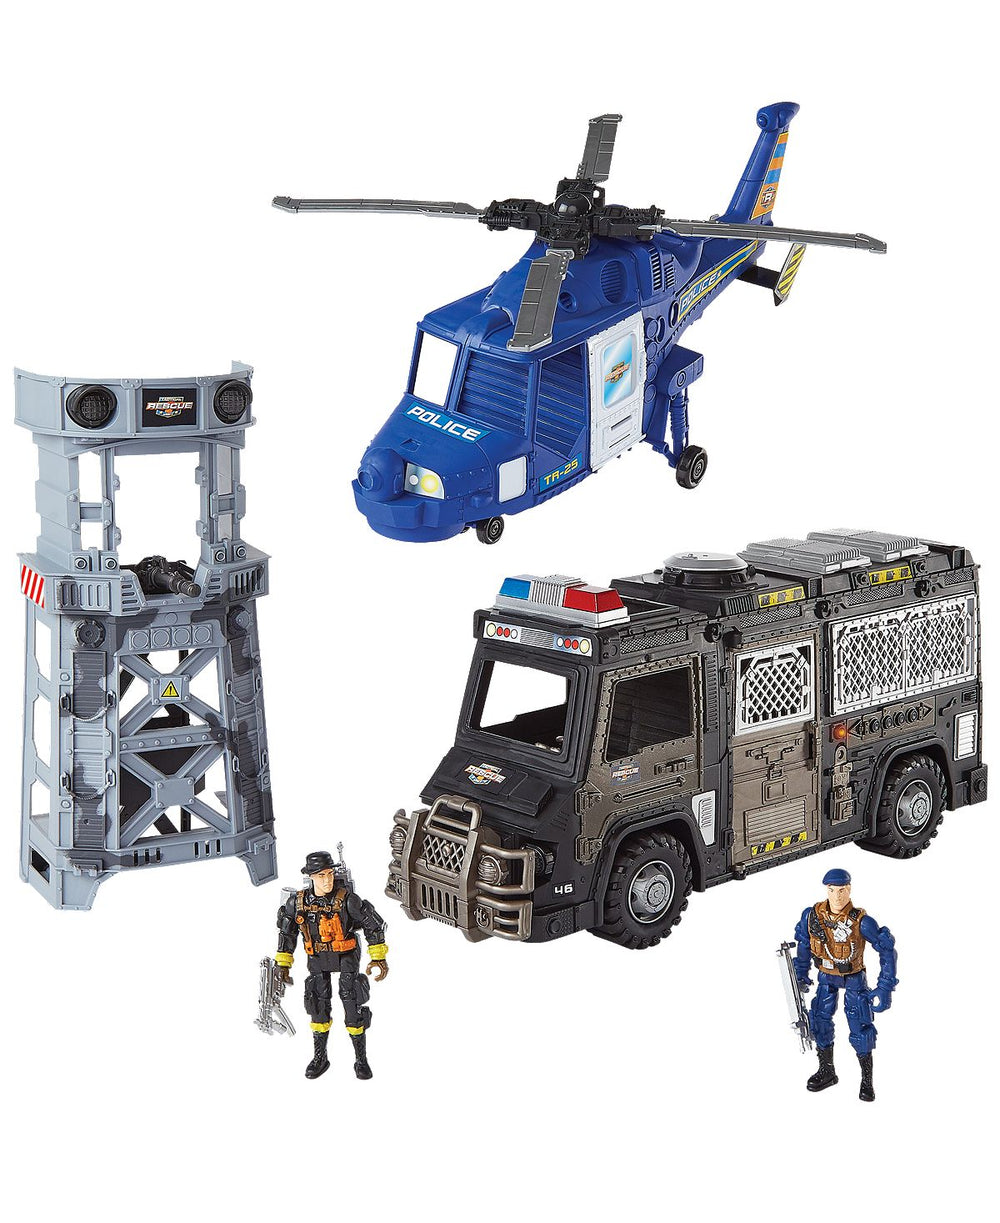 True Heroes SWAT Police Playset with Helicopter and Truck - Toys R Us Exclusive